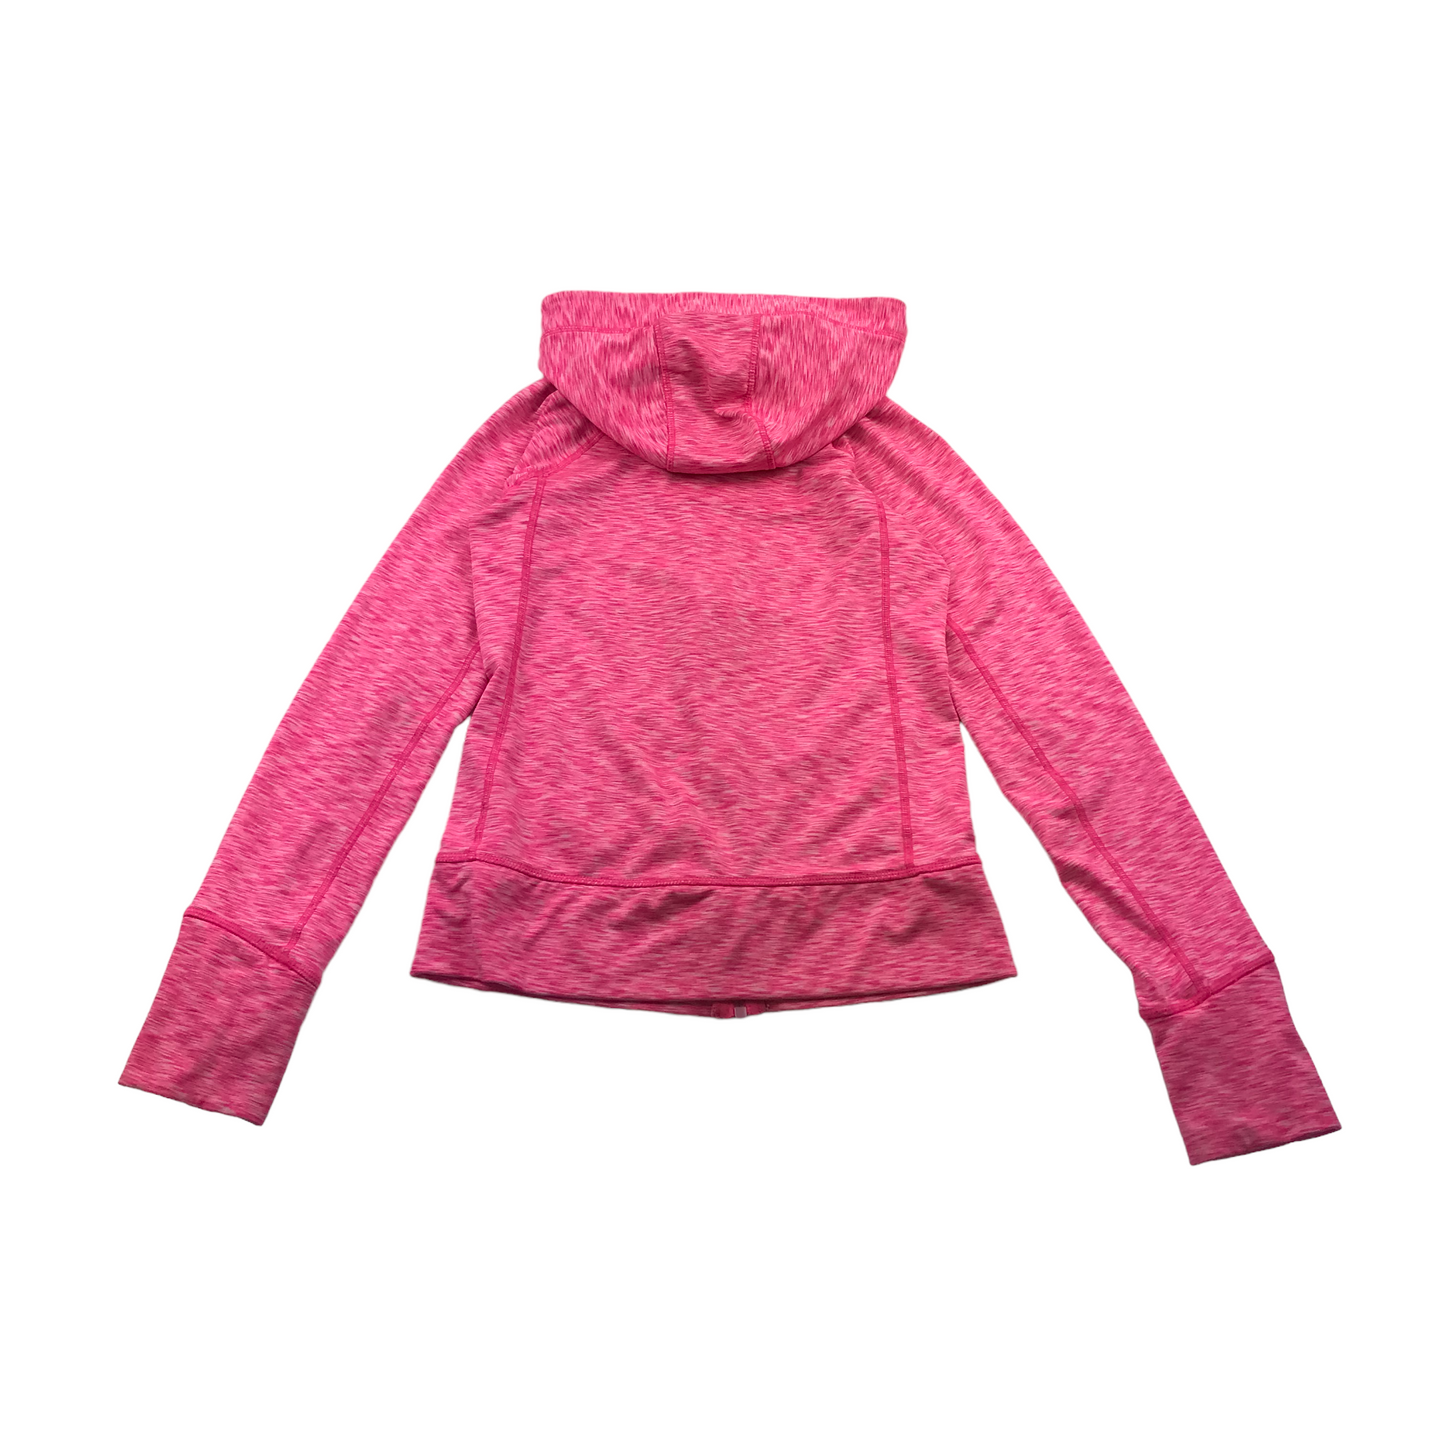 90 degree by reflex Pink Sports Top Age 12